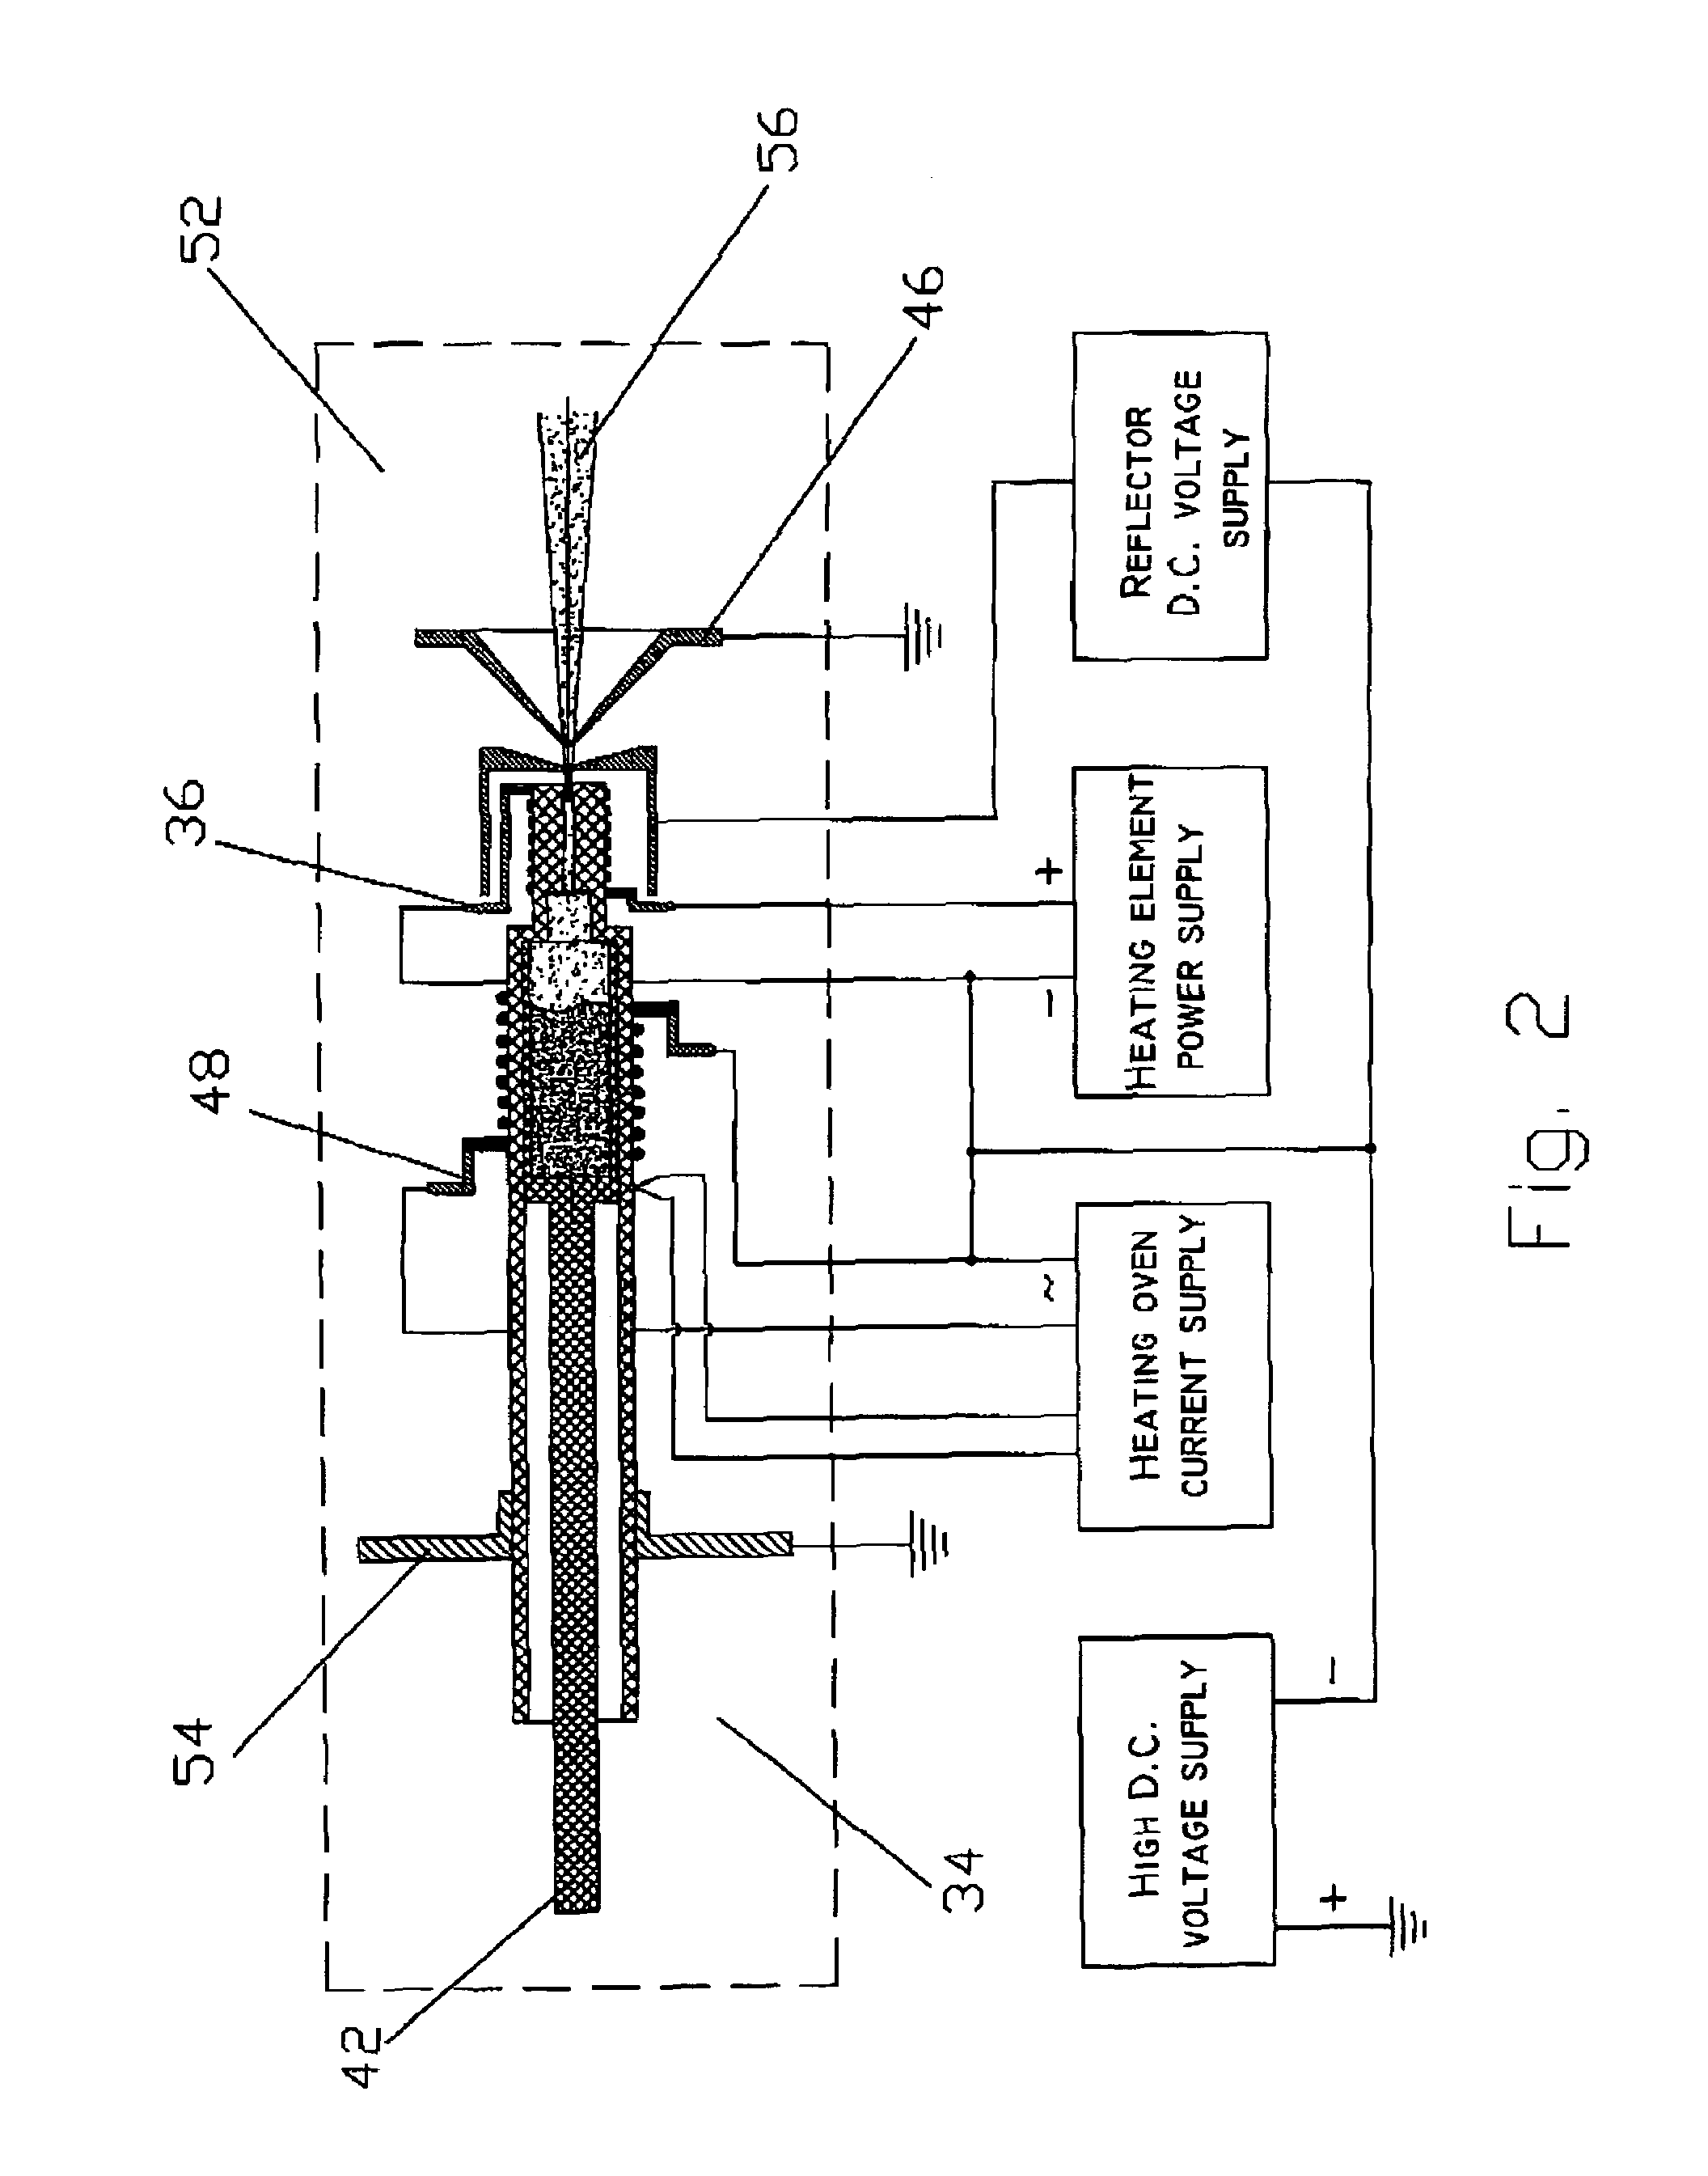 Method and apparatus for the generation of anionic and neutral particulate beams and a system using same